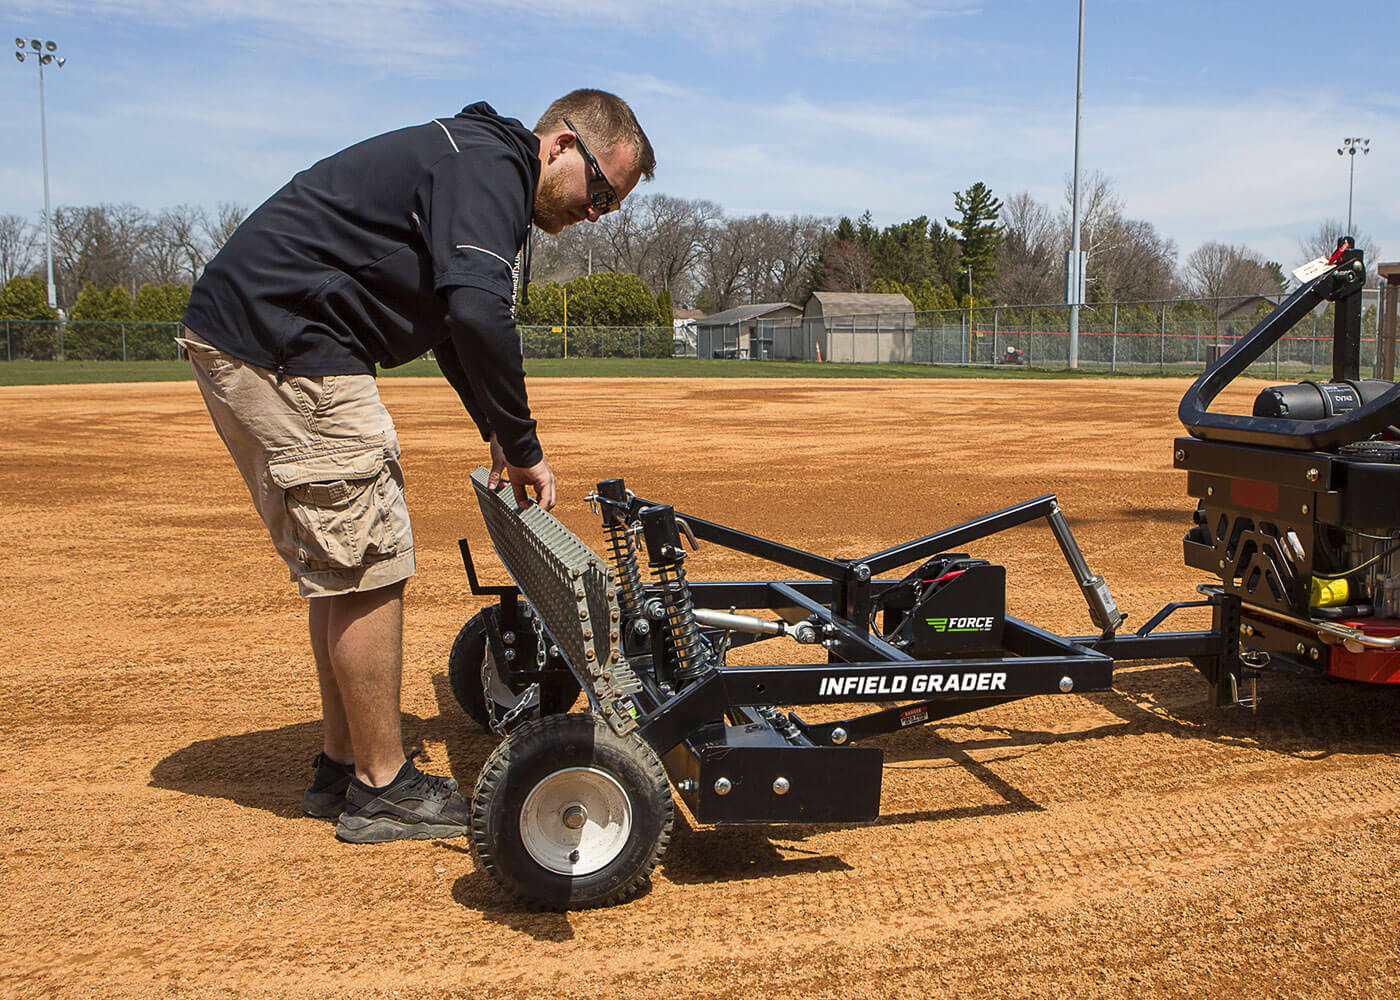 Portable infield grader features for Force 